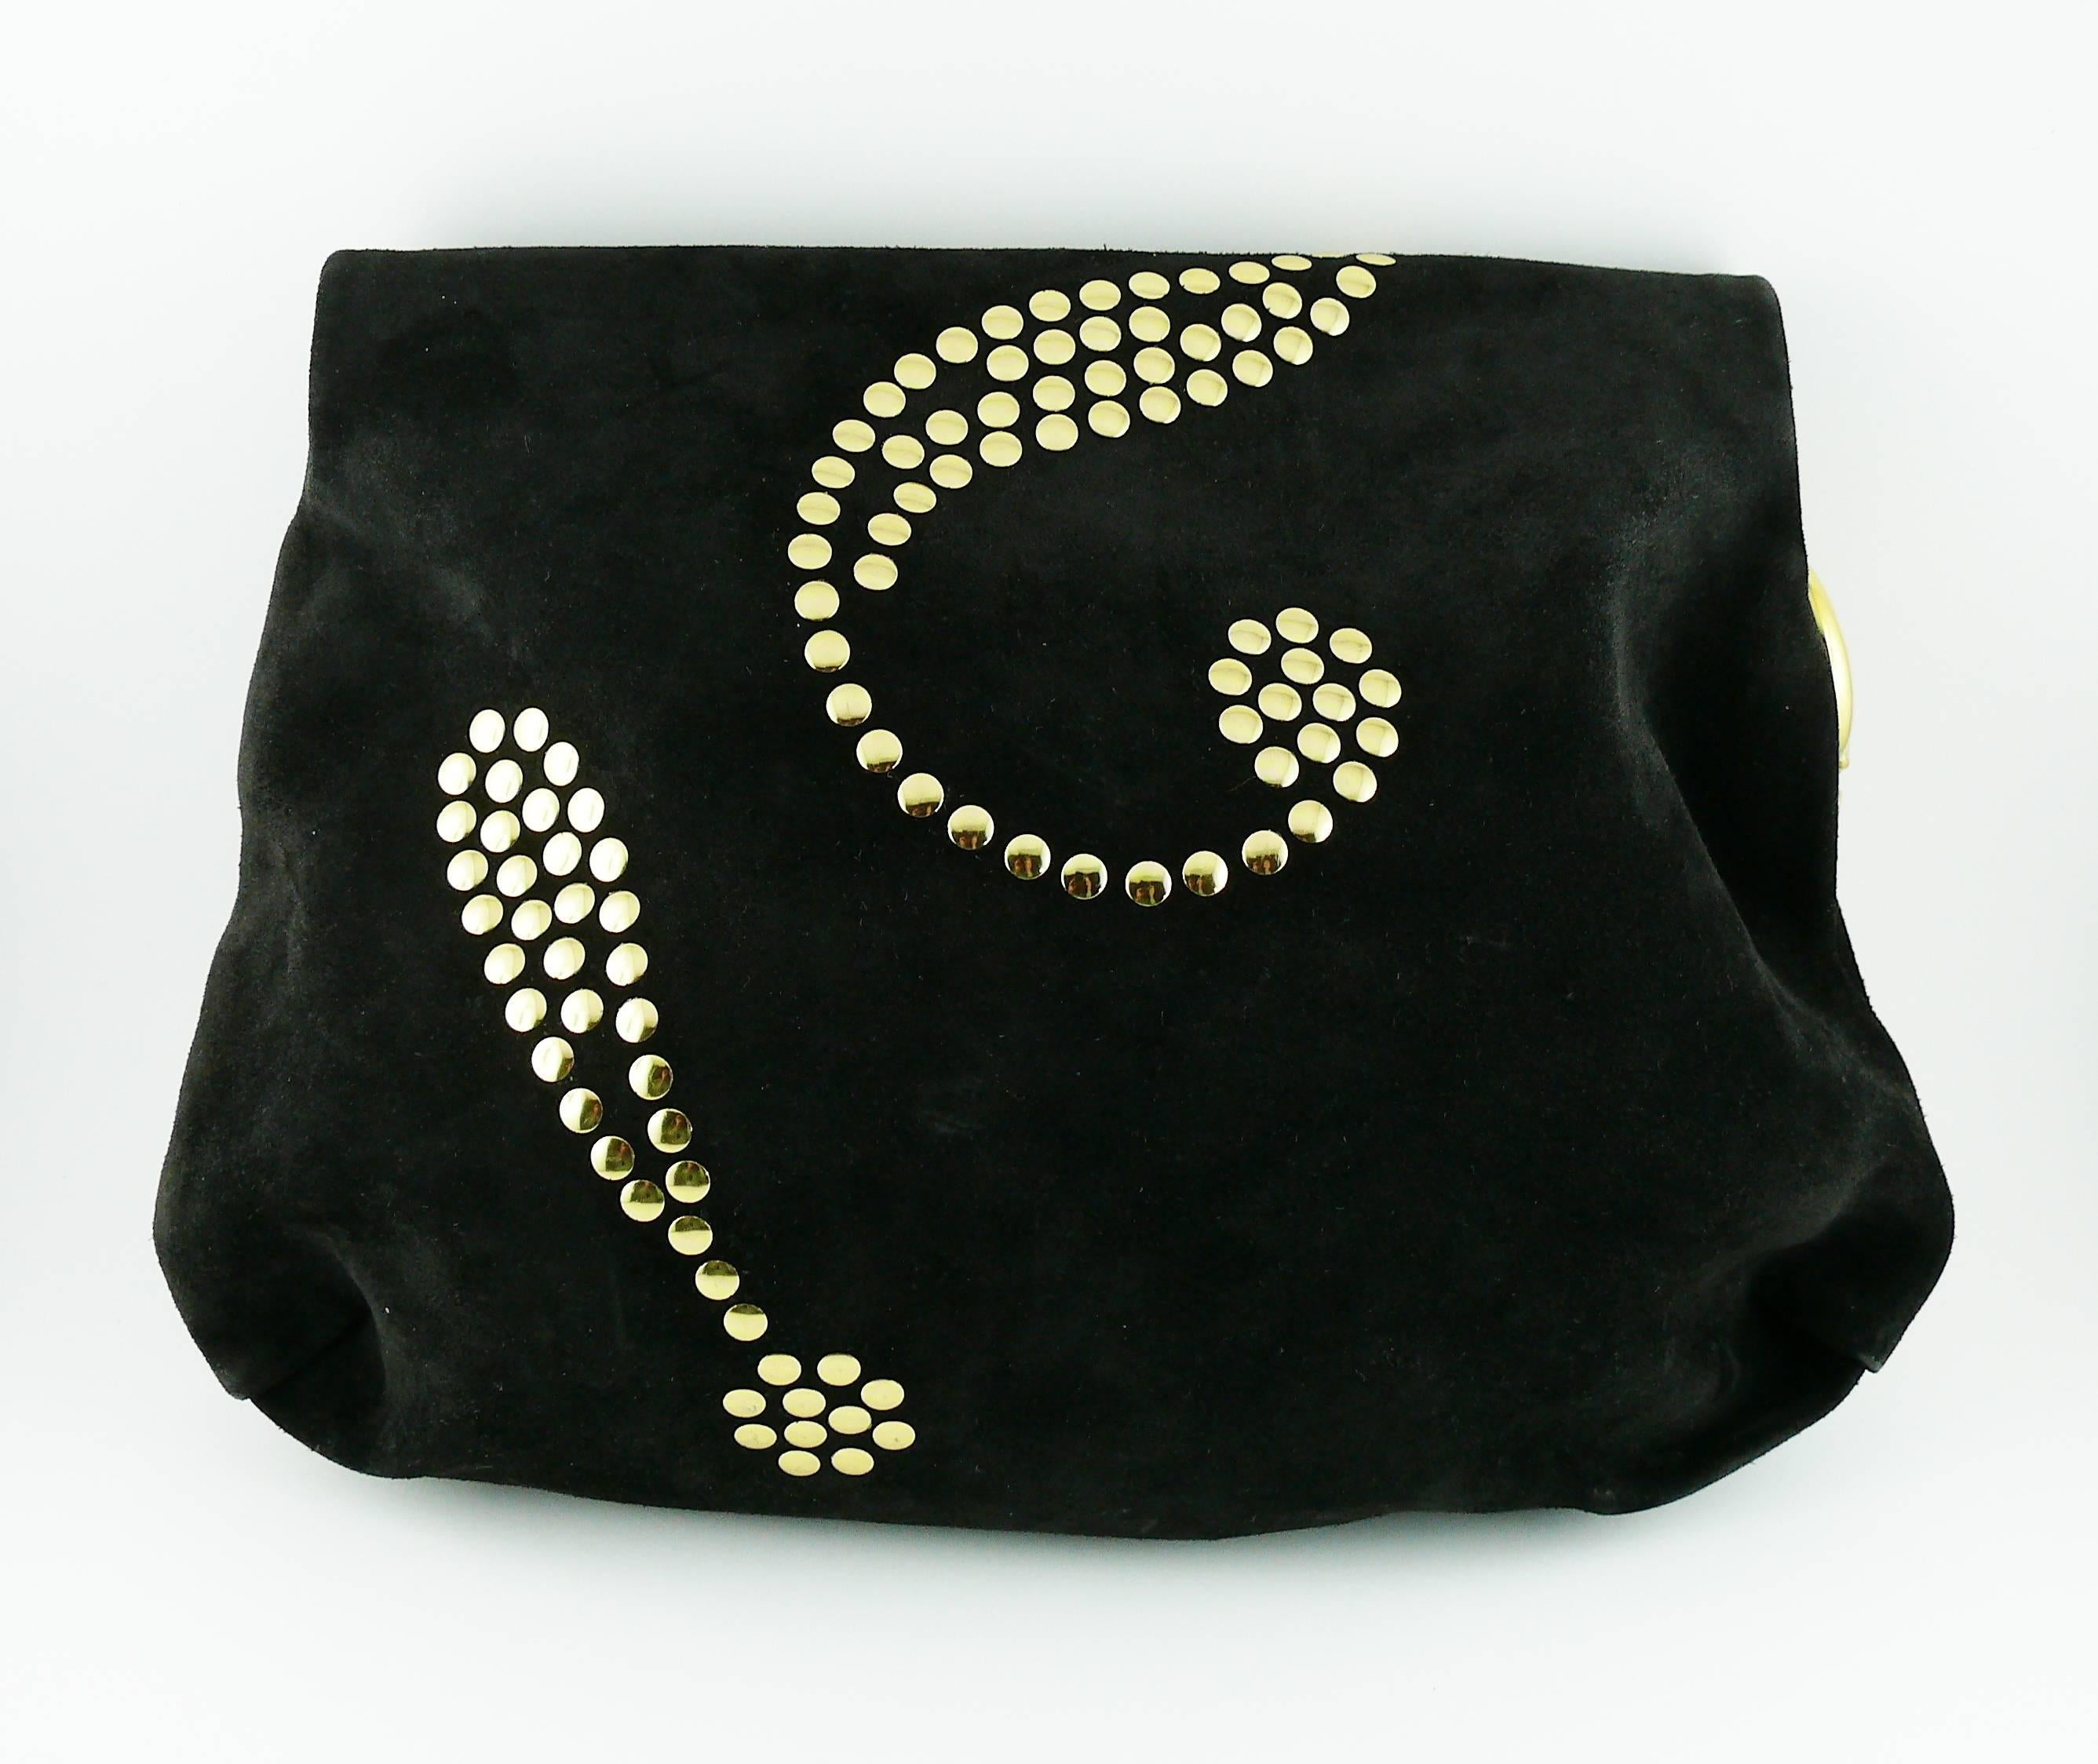 MOSCHINO vintage black studded suede clutch featuring four iconic symbols (heart, question mark, exclamation mark, peace) and signature name.

Gold toned chain.

Zip closure.

Embossed MOSCHINO by REDWALL on the ring.
Stamped on the lining MOSCHINO